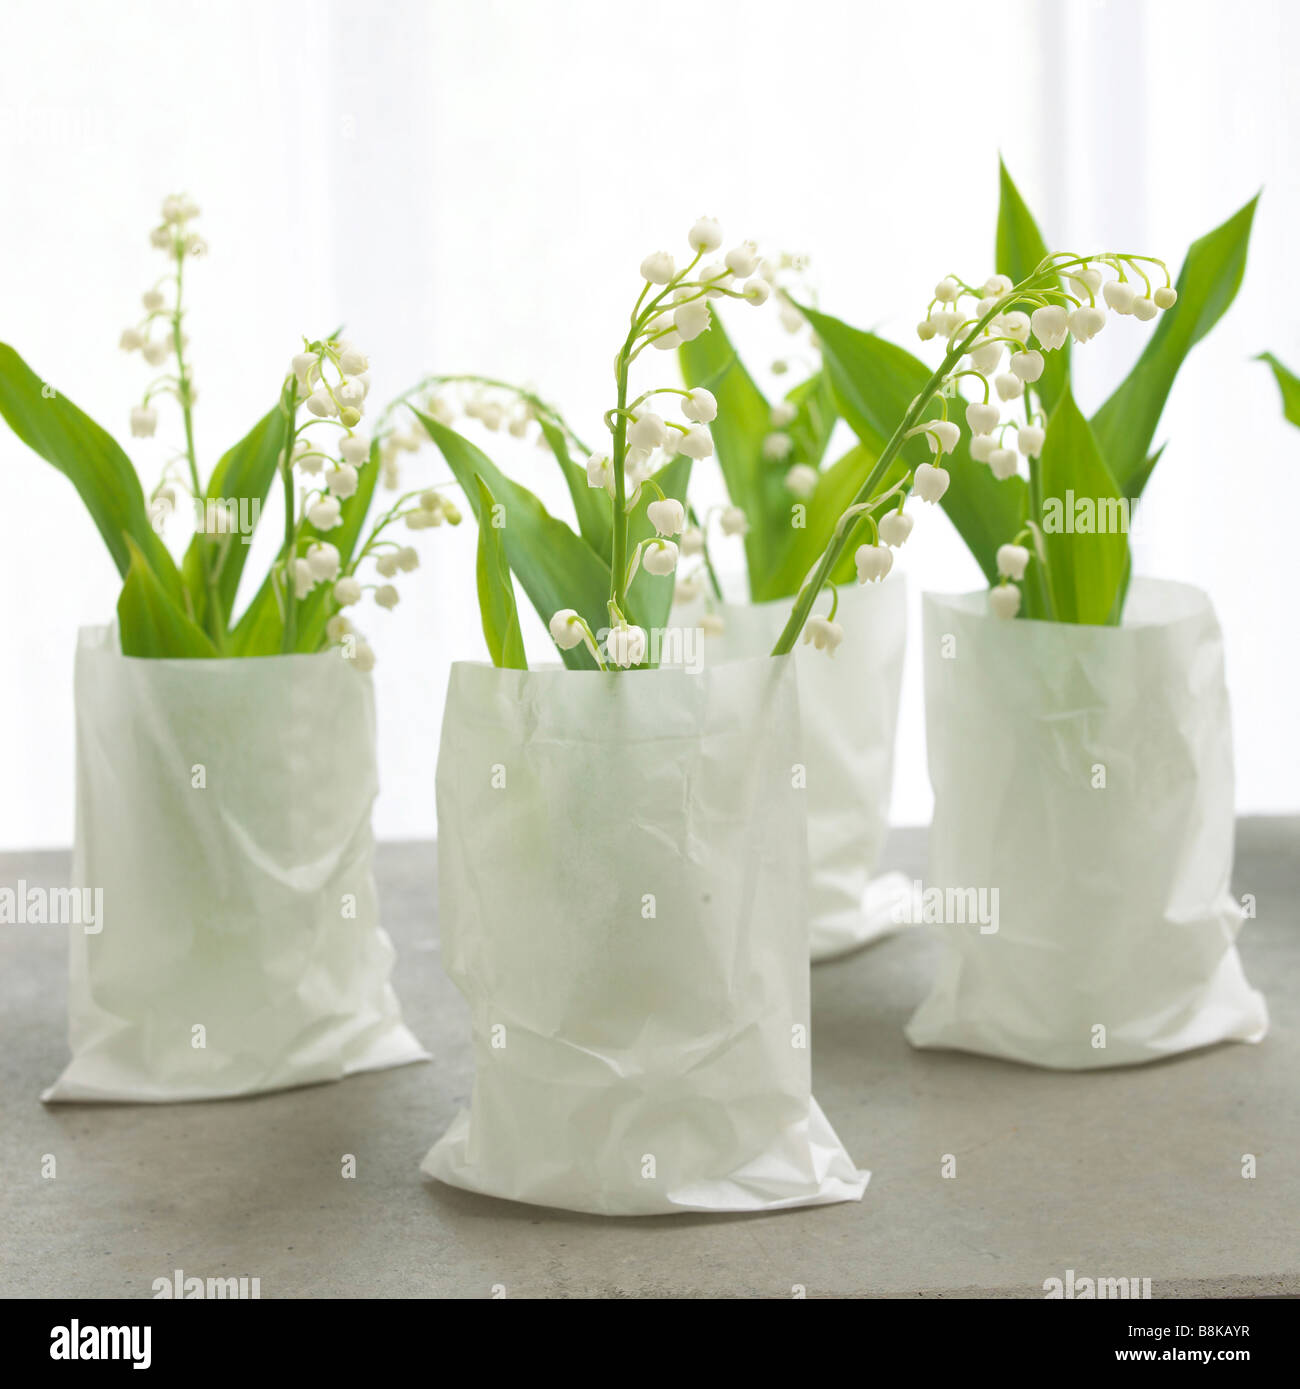 lilies of the valley in white paper bags Stock Photo